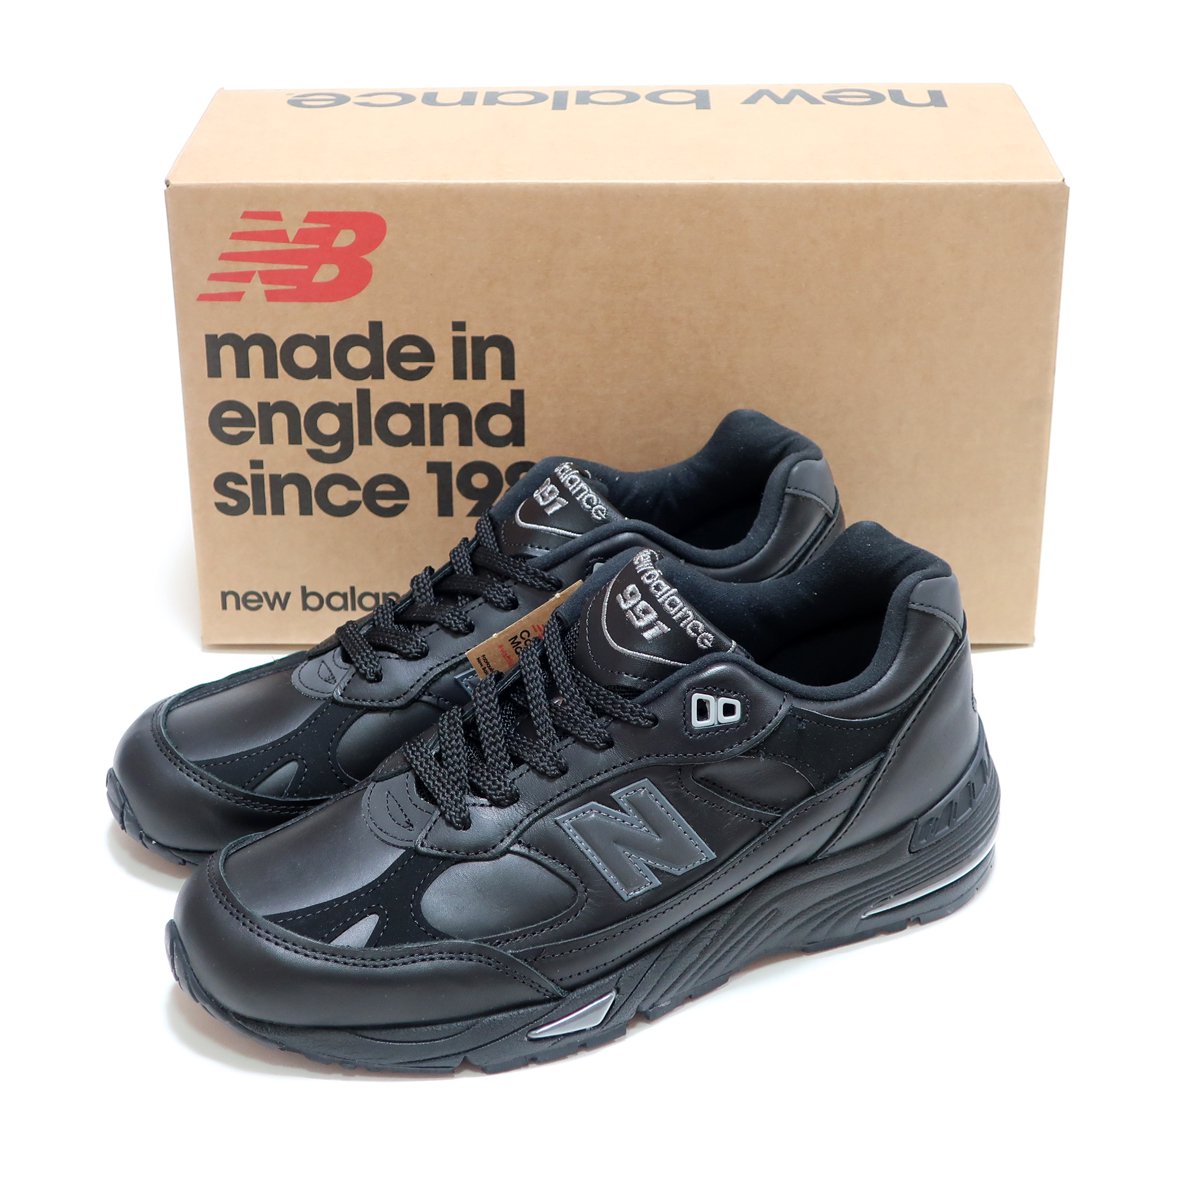 NEW BALANCE M991TK TRIPLE BLACK LEATHER MADE IN ENGLAND ...